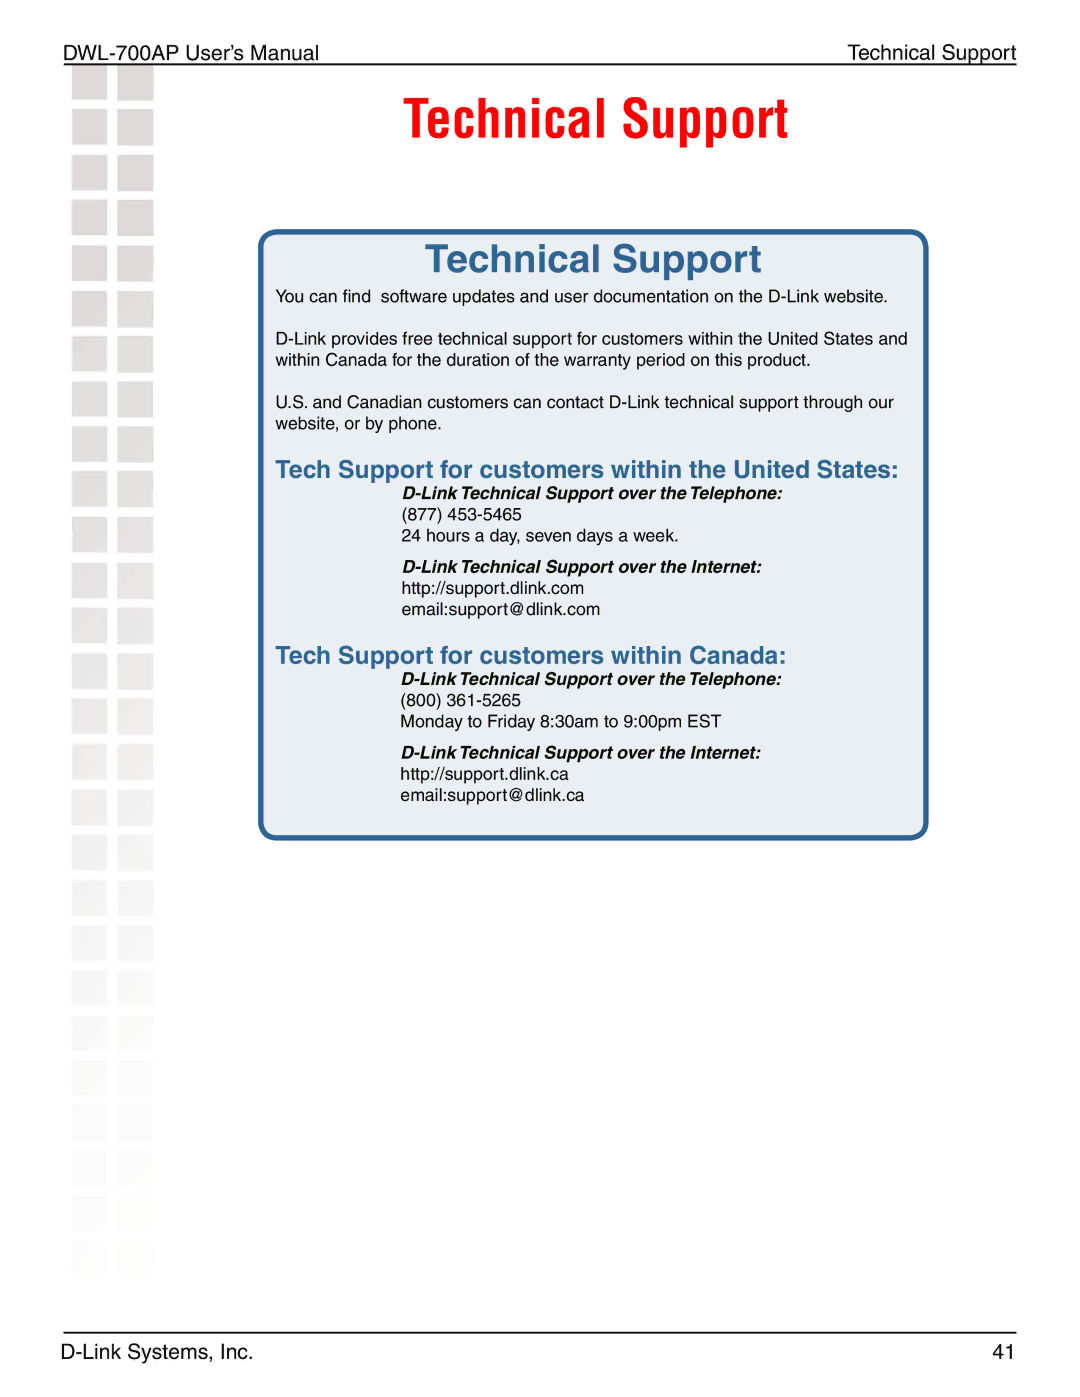 D-Link 700AP manual Technical Support 